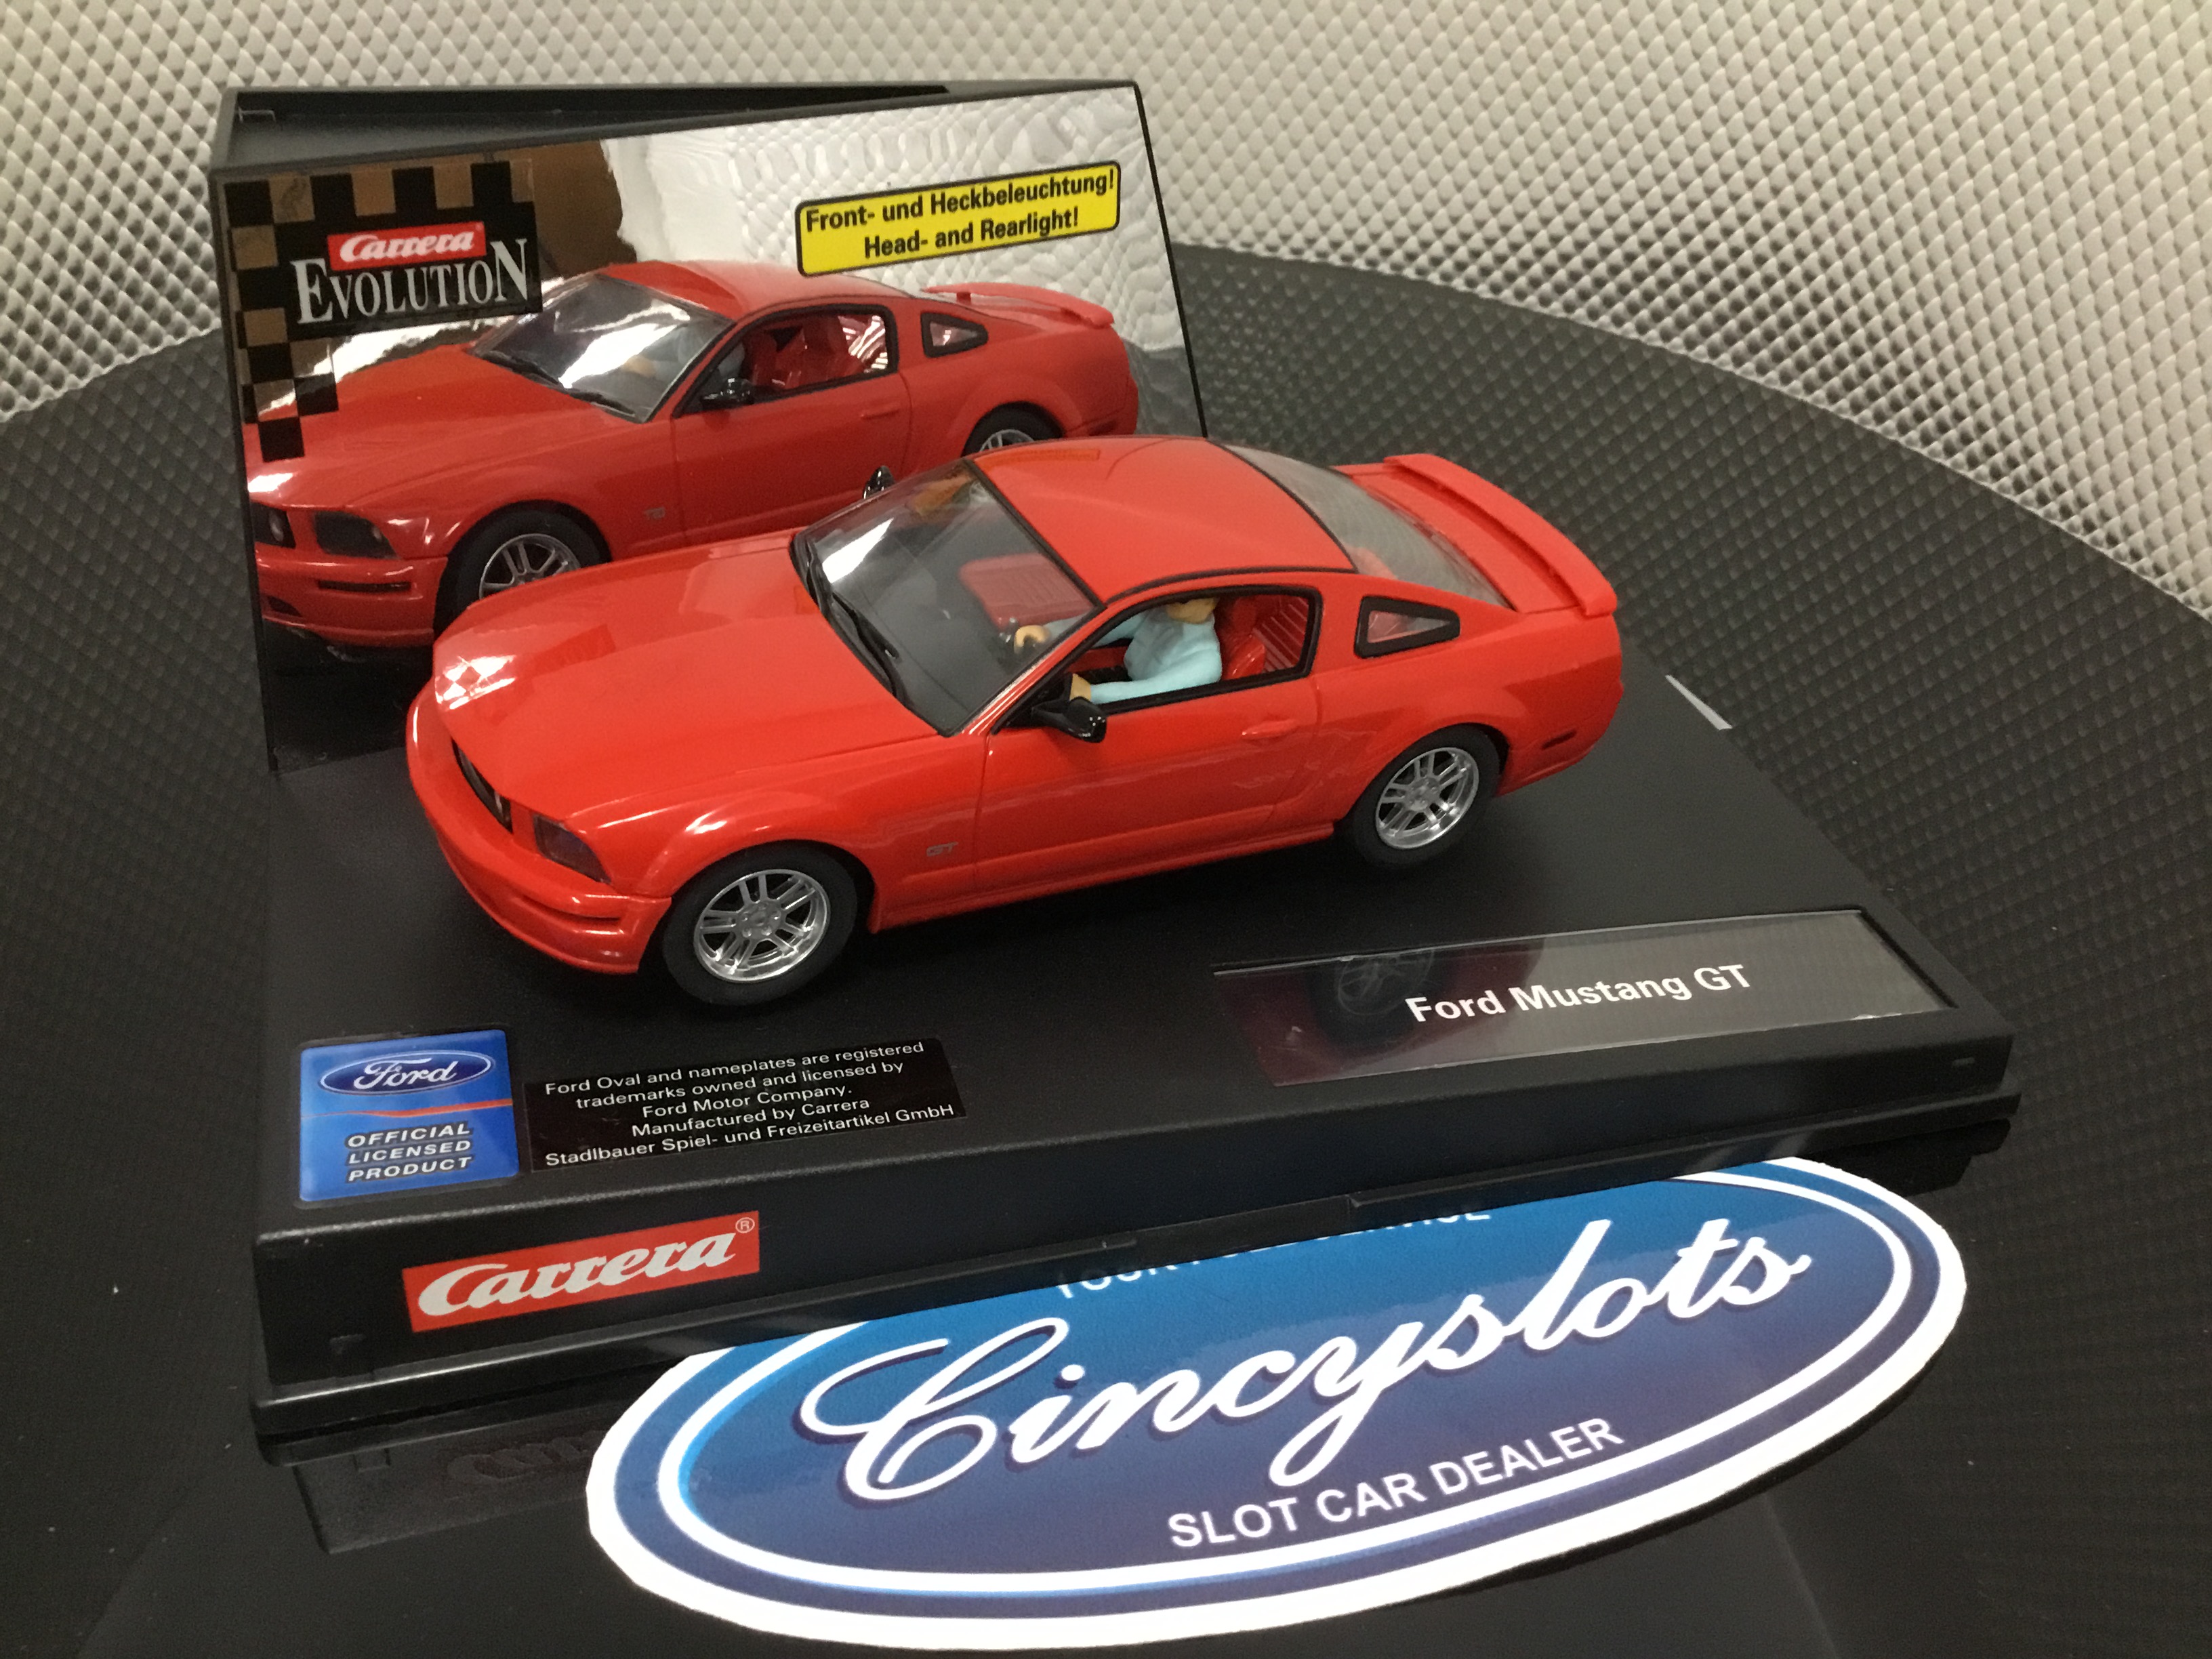 Carrera 27636 Ford Mustang GTY 132 Scale Analog Slot Car Racing Vehicle for C.. for sale online